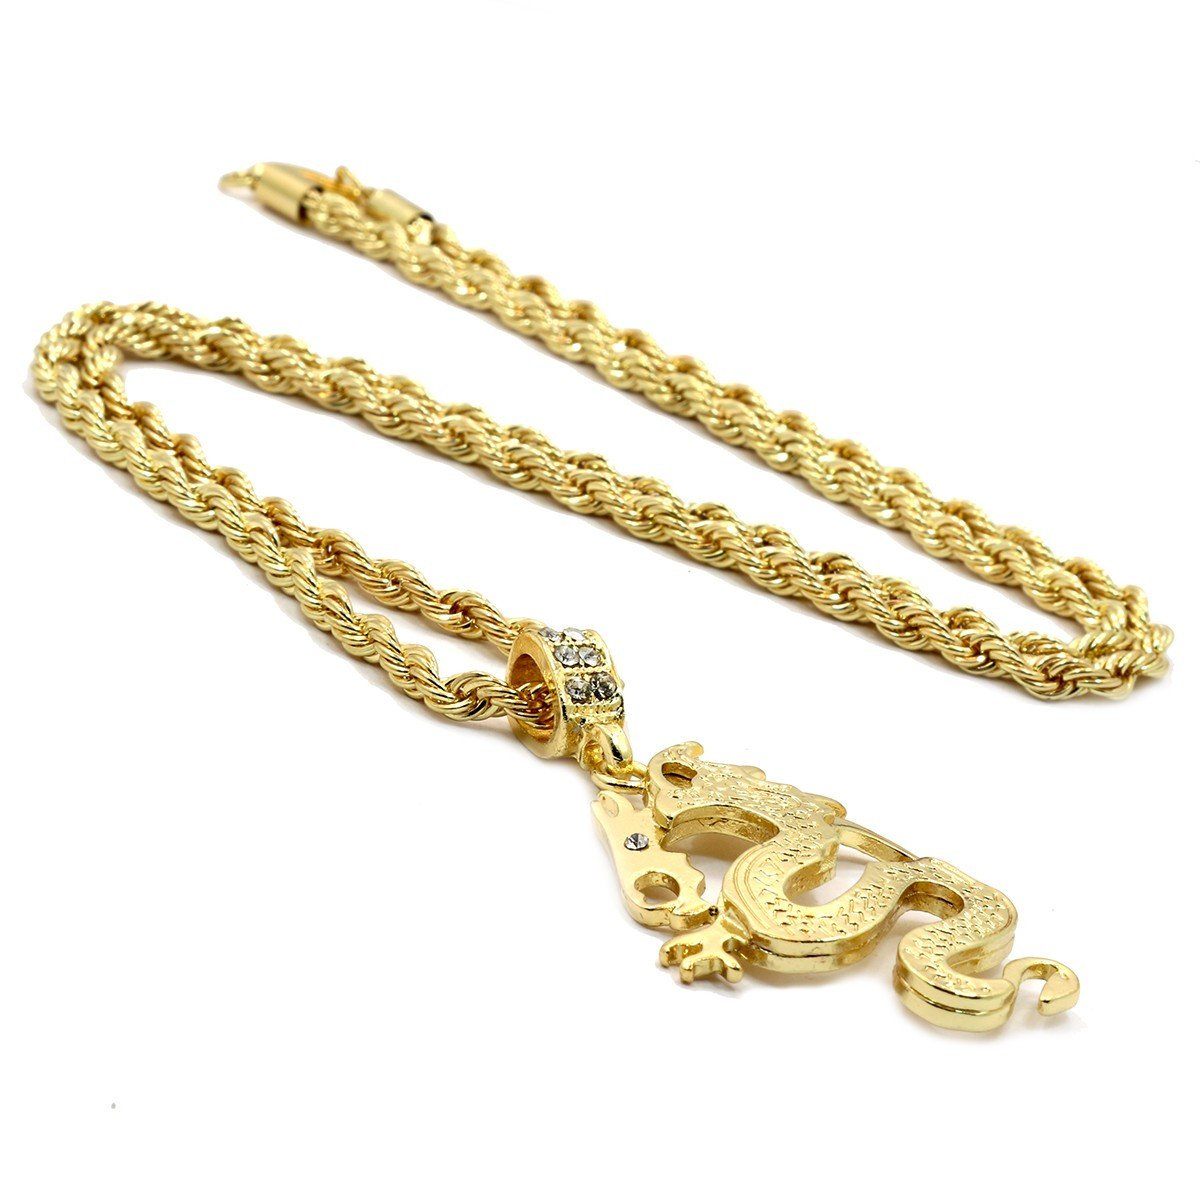 DRAGON PENDANT WITH GOLD ROPE CHAIN